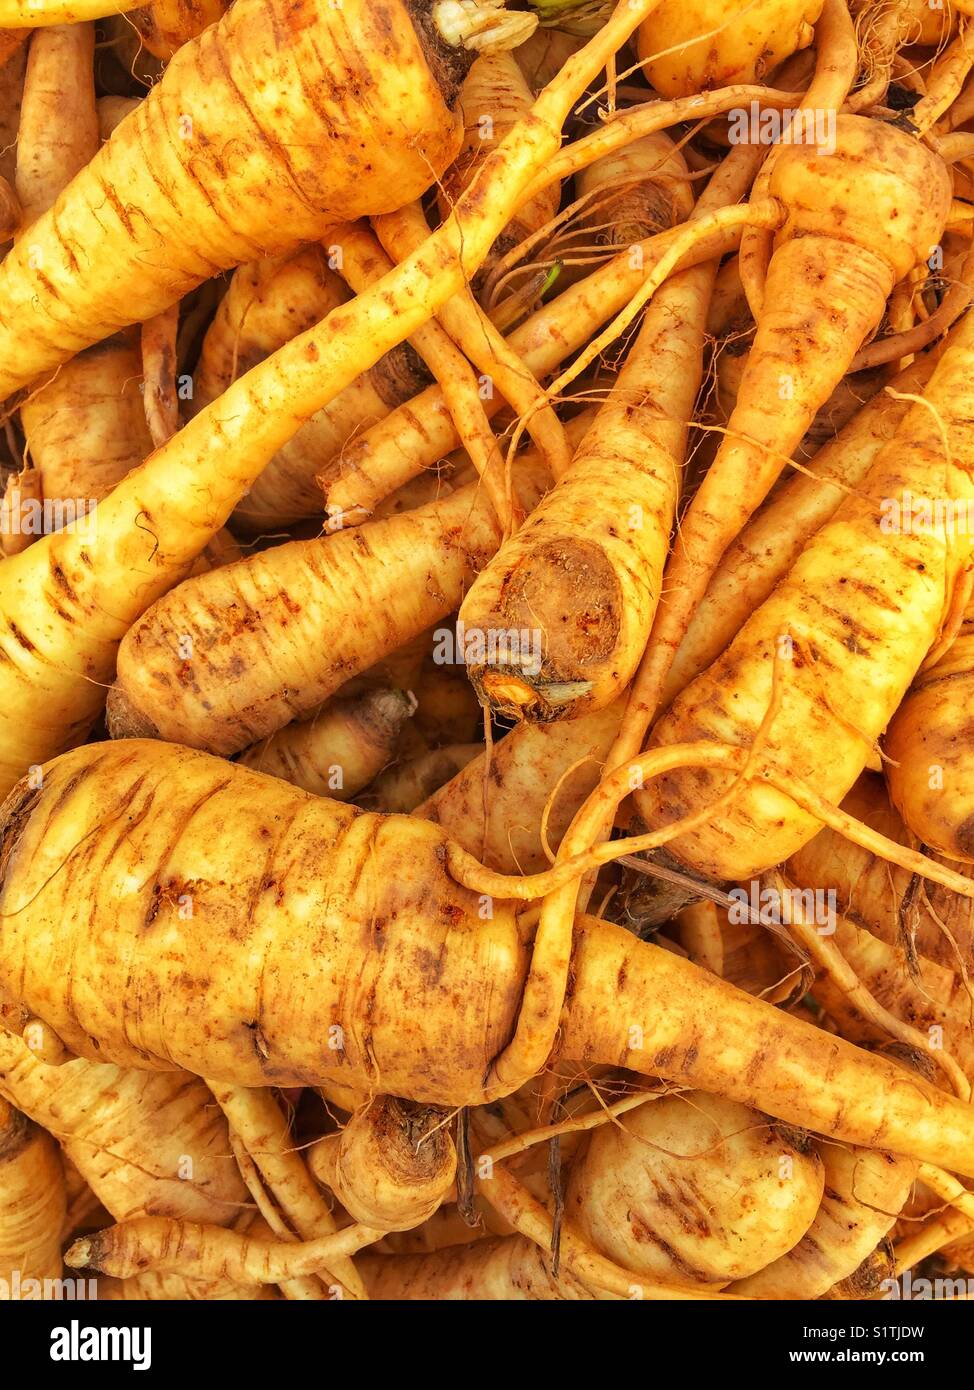 Parsnips straight from the farm to market, soil included Stock Photo